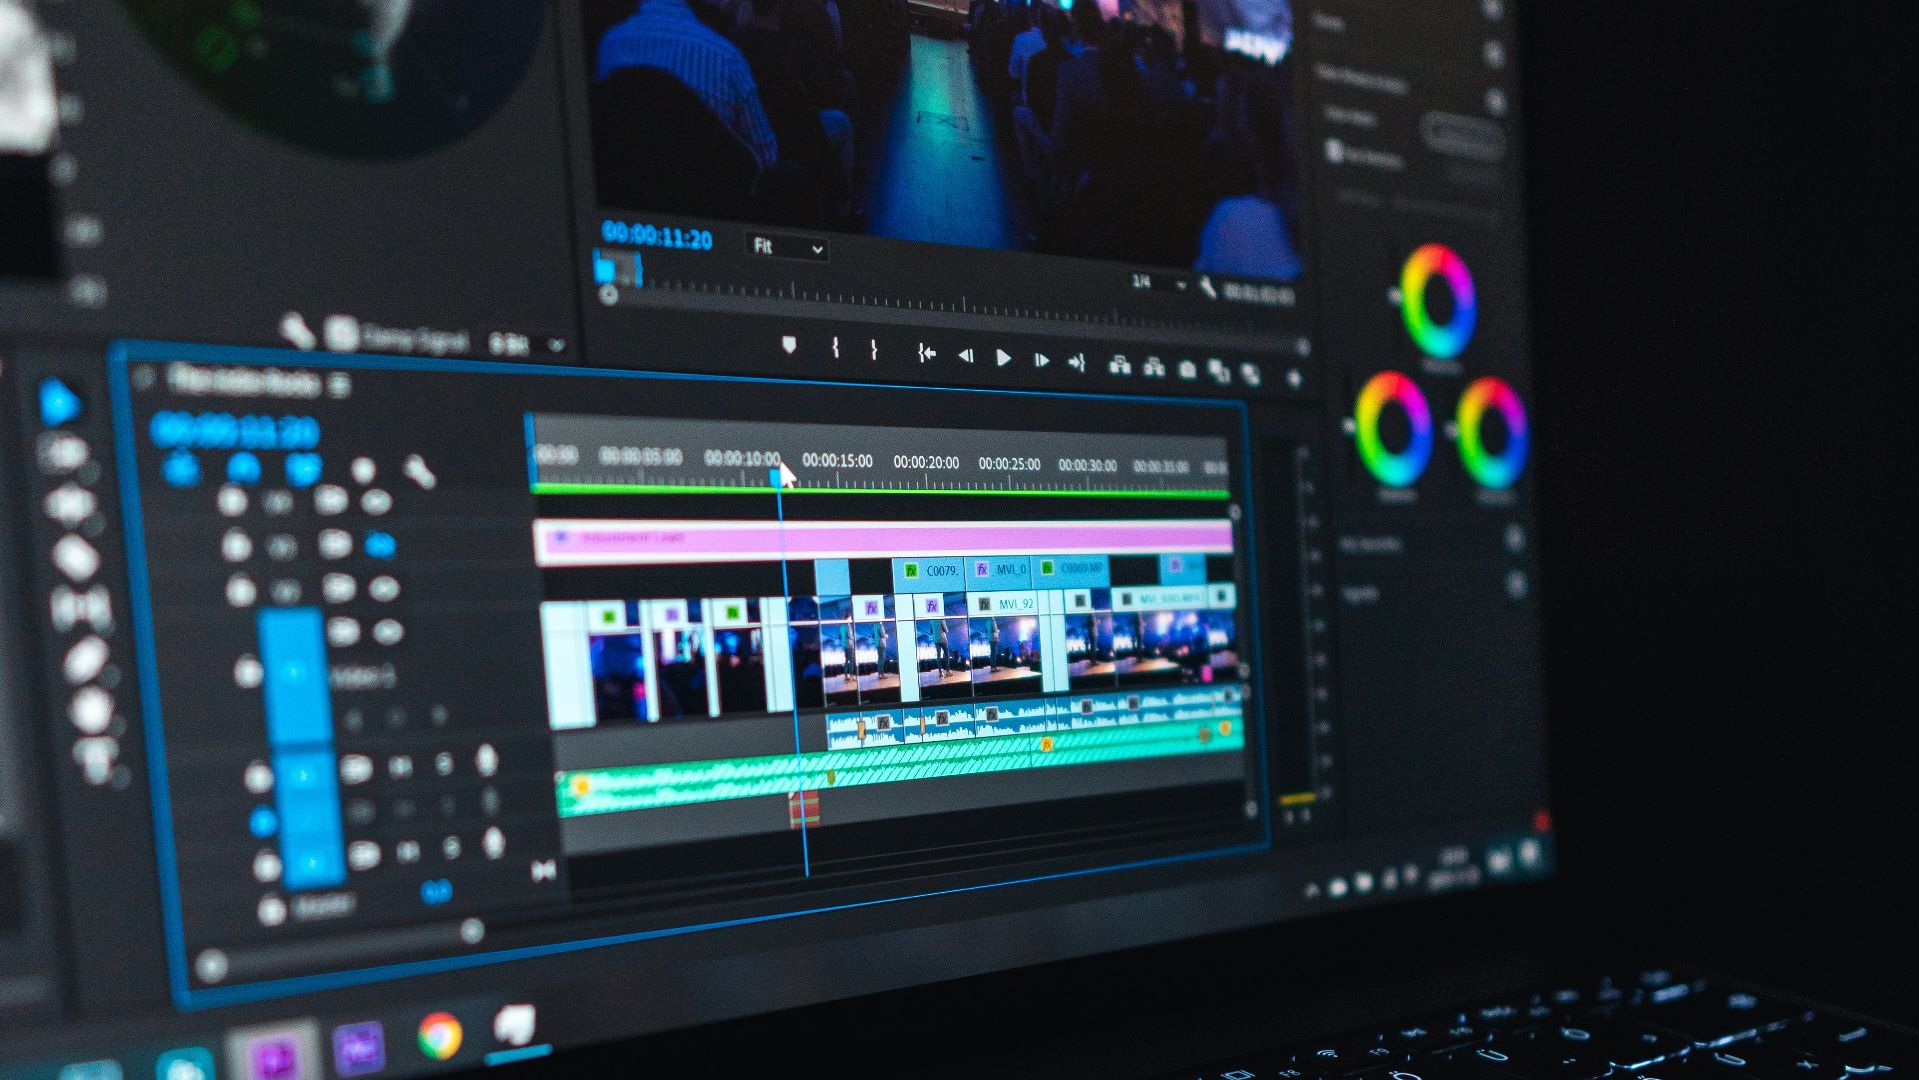 The impact of AI on video editing